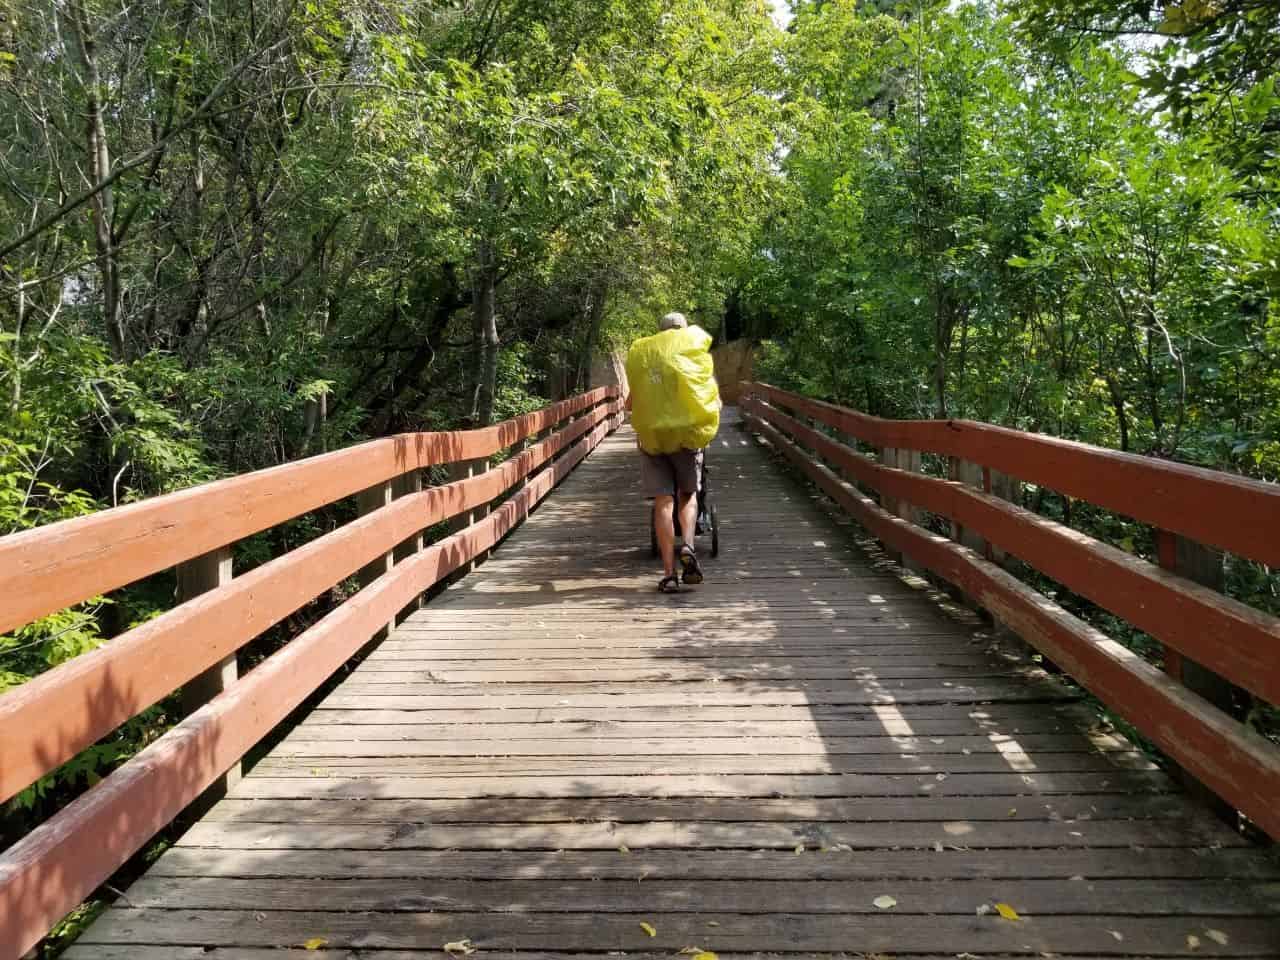 Paved cycling lanes, boardwalks, and mostly flat gradients make the Meewasin Trail, which is part of the Trans Canada Trail, suitable for all fitness levels.